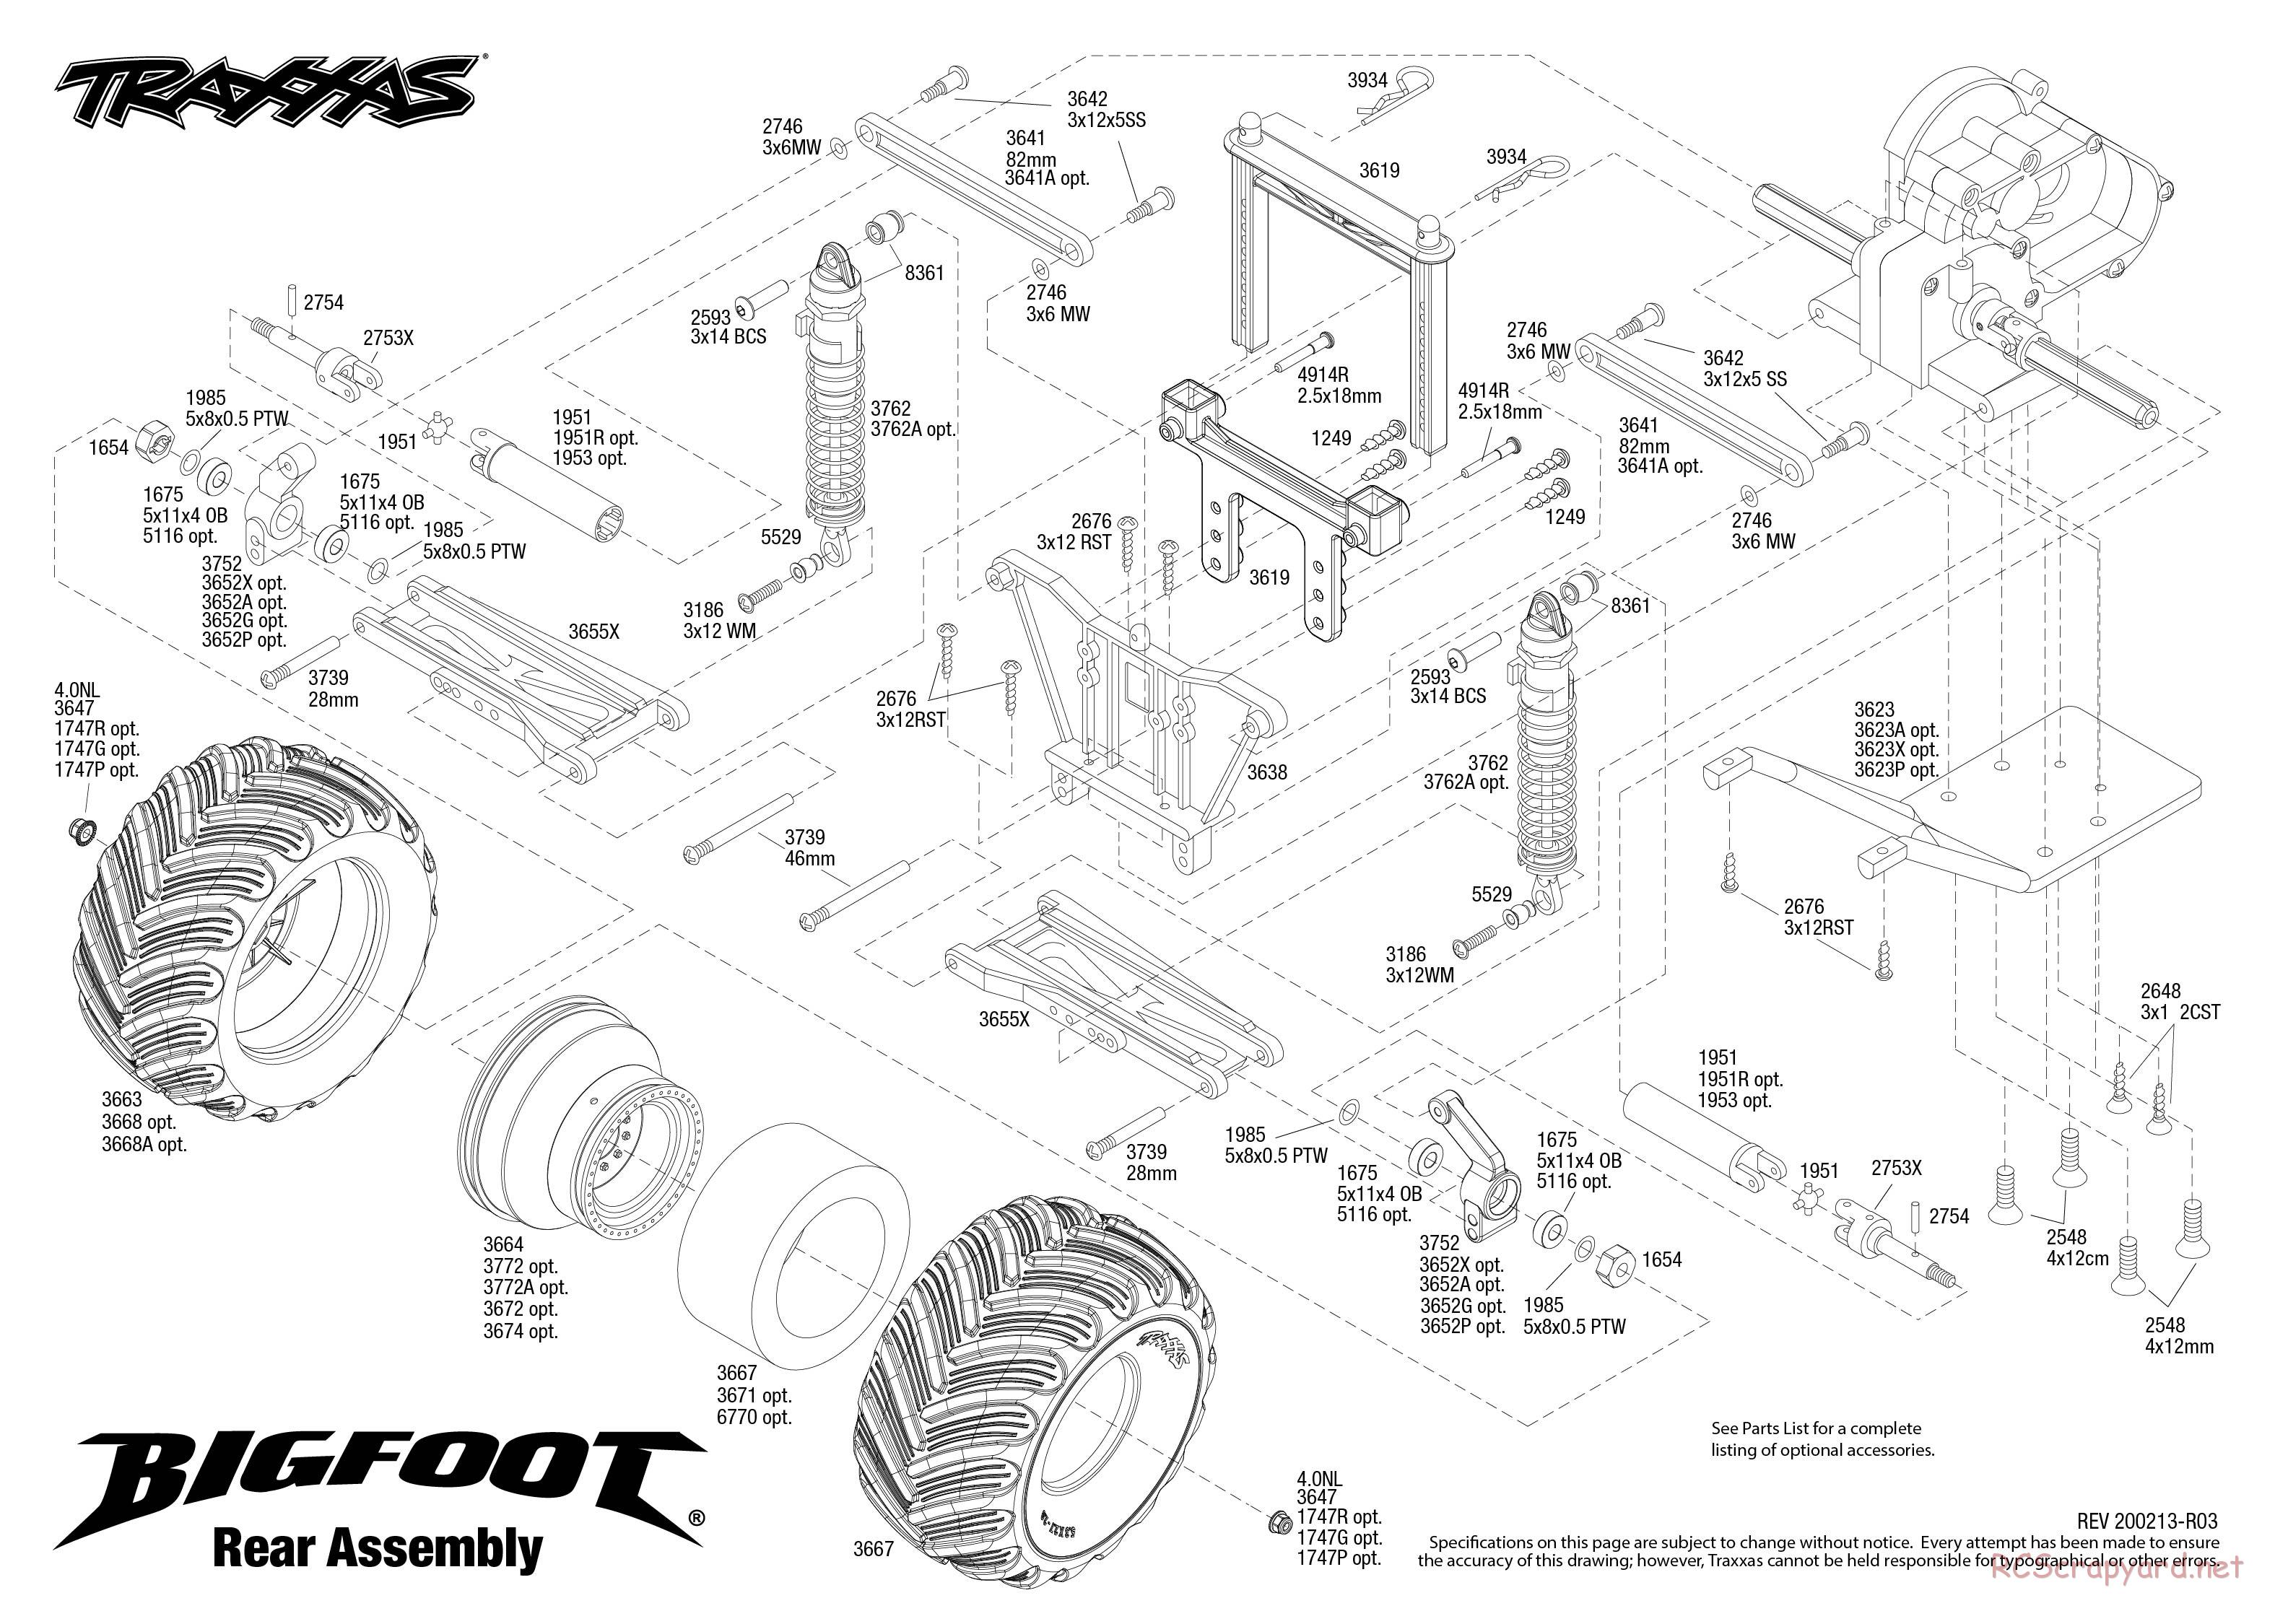 Traxxas - Bigfoot - Exploded Views - Page 3